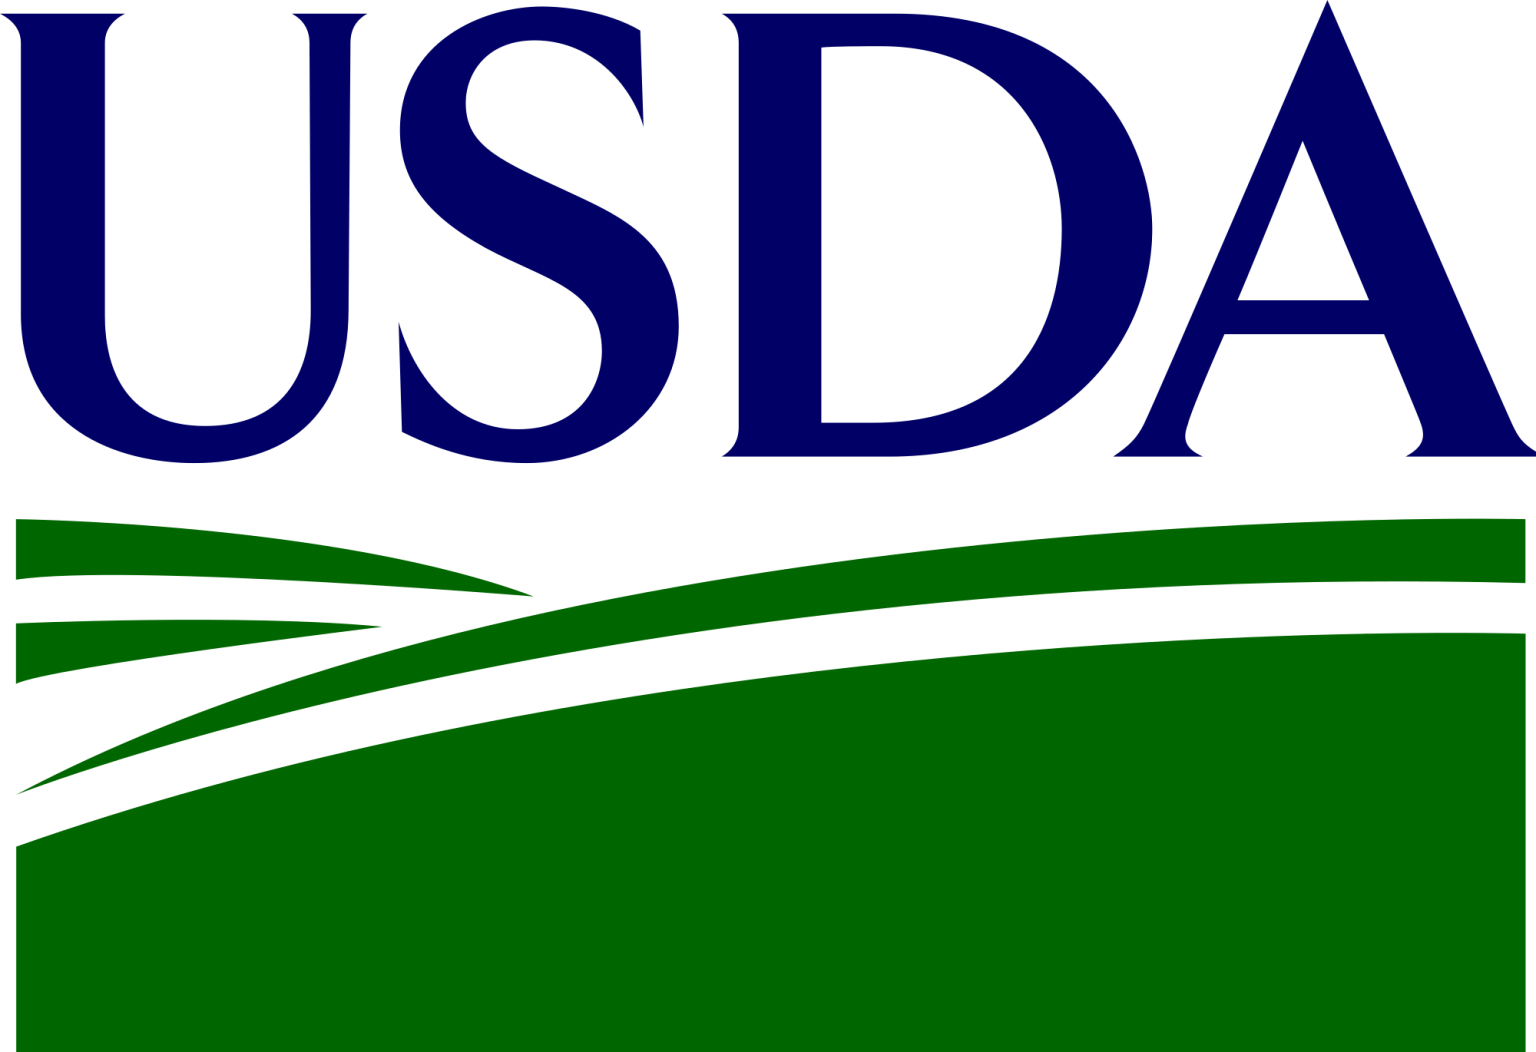 private-universities-can-benefit-from-usda-rural-development-loans